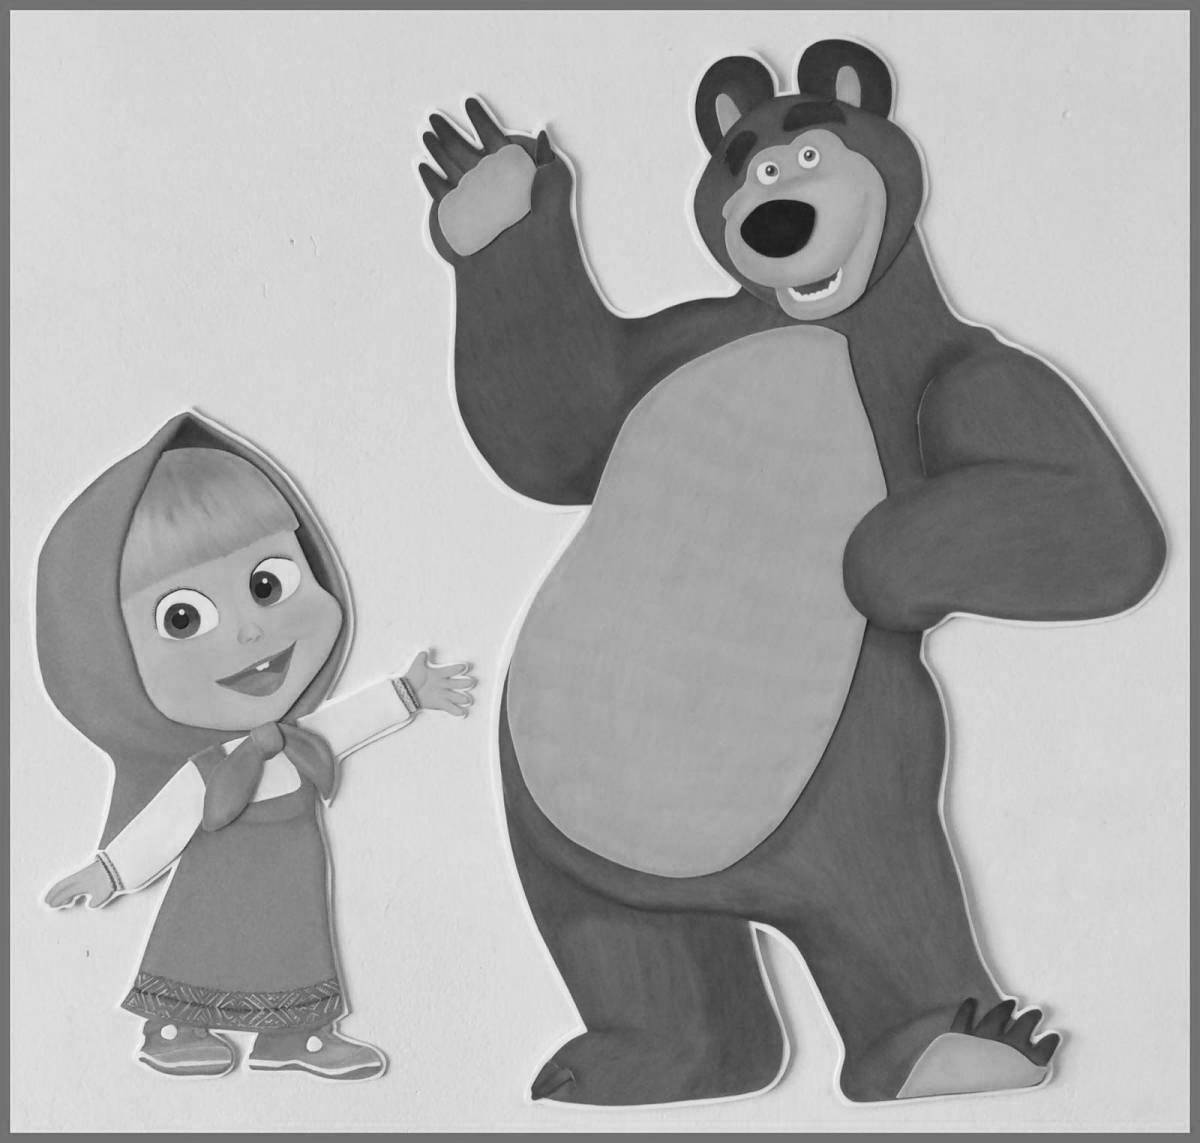 Color-loving Masha and the bear coloring book